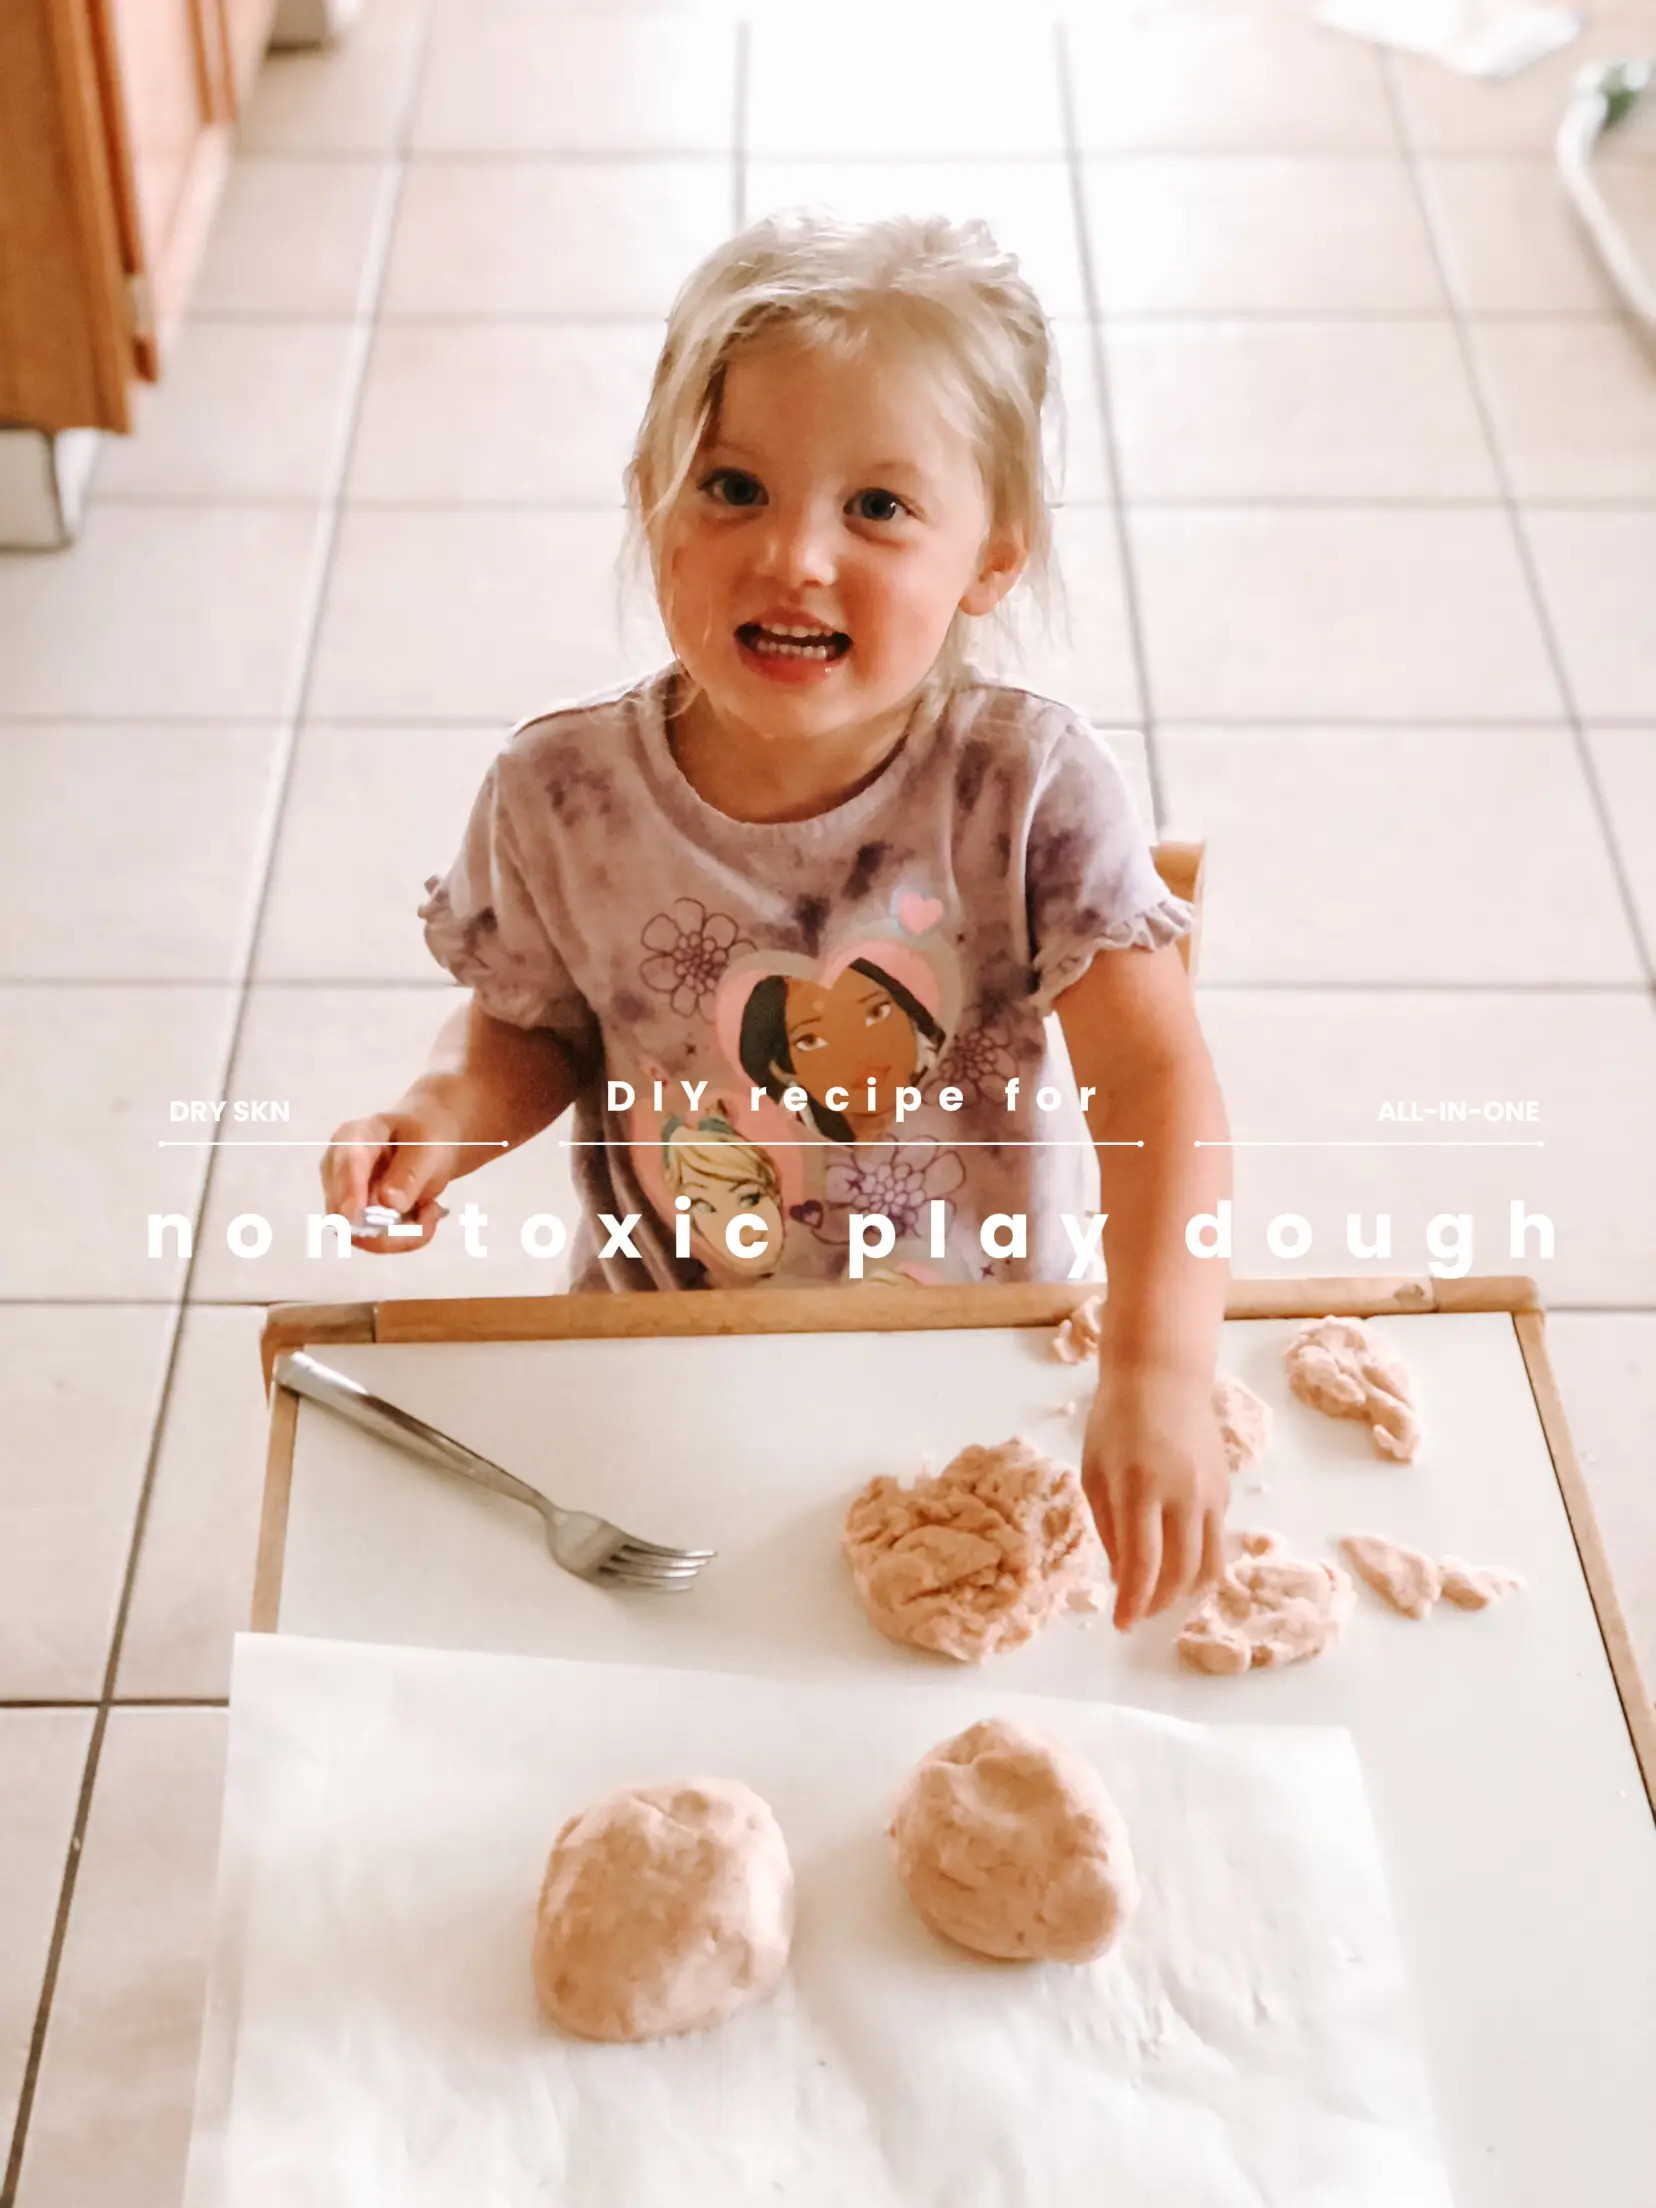 DIY non-toxic play dough!, Gallery posted by Denise Wedel